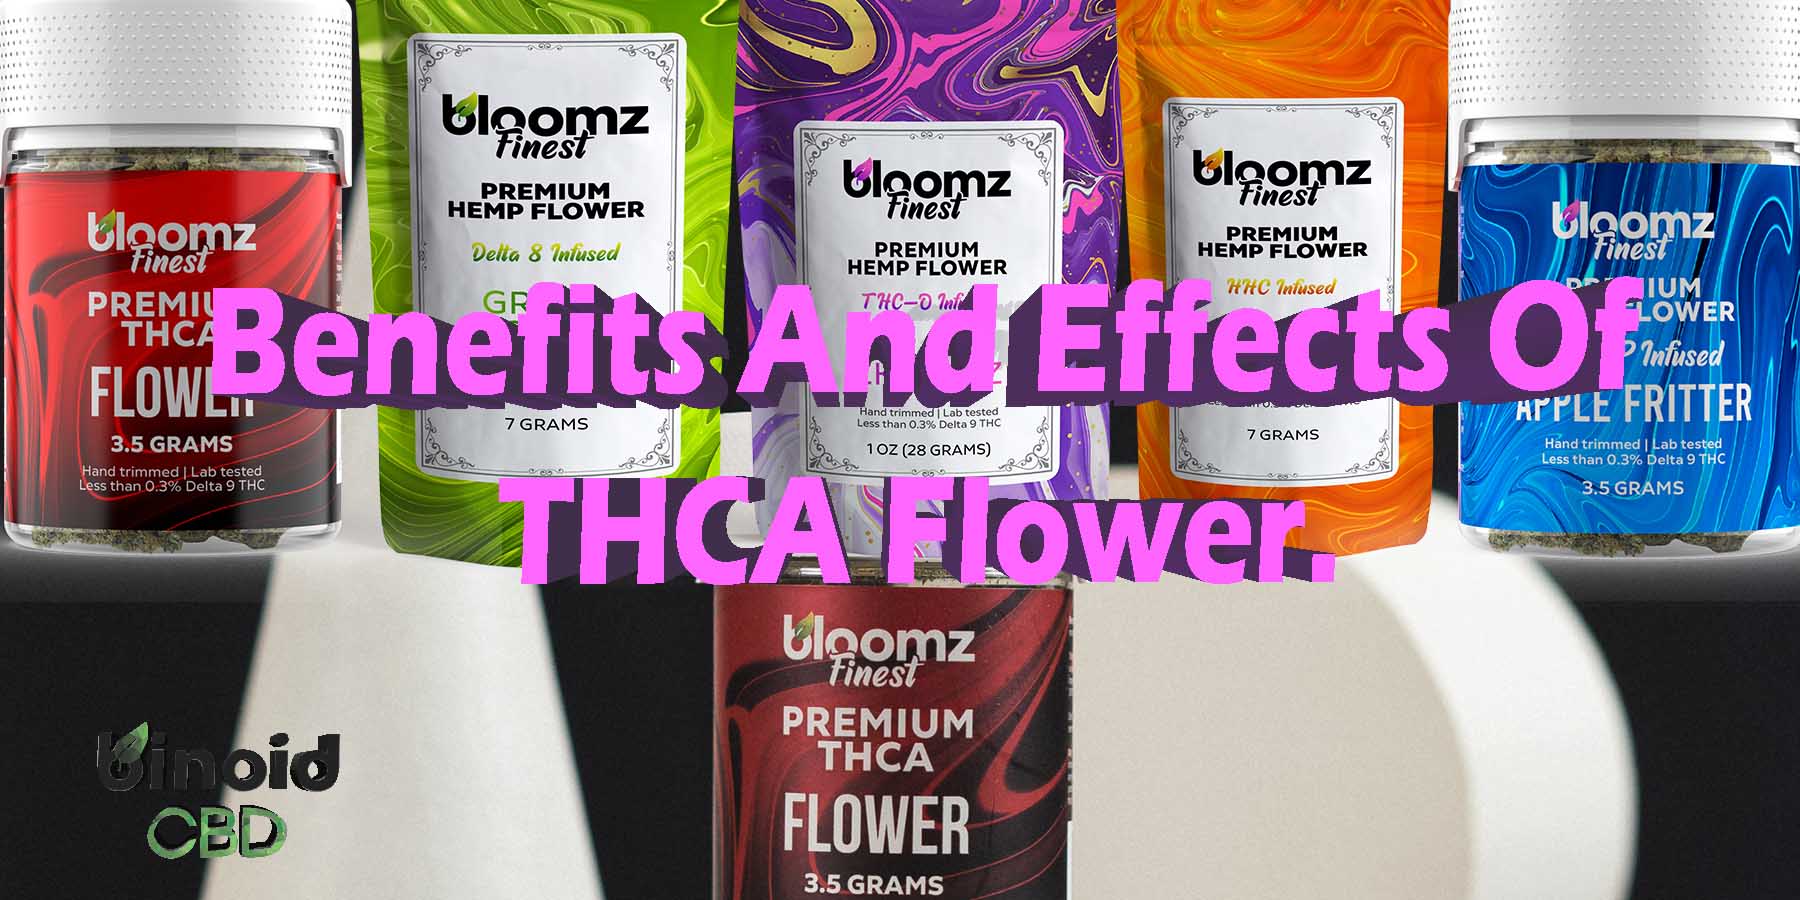 Benefits And Effects Of THCA Flower Benefits Anxiety Sleep Insomnia PreRolls Best Brand Strongest Real Legal Binoid